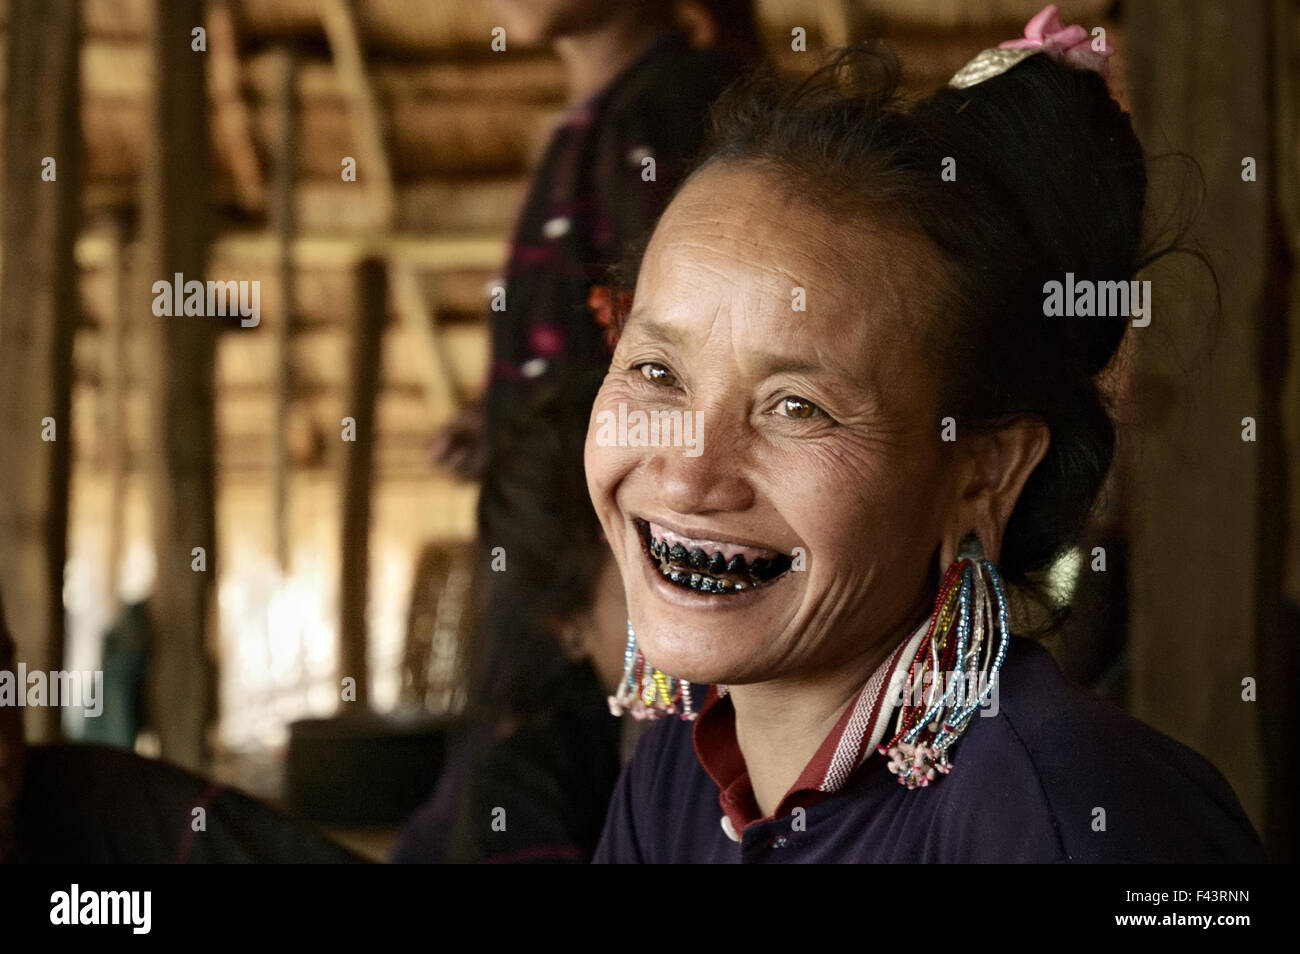 Stock Photo - Woman of the <b>Ann tribe</b> with black teeth smiles inside her ... - woman-of-the-ann-tribe-with-black-teeth-smiles-inside-her-house-in-F43RNN